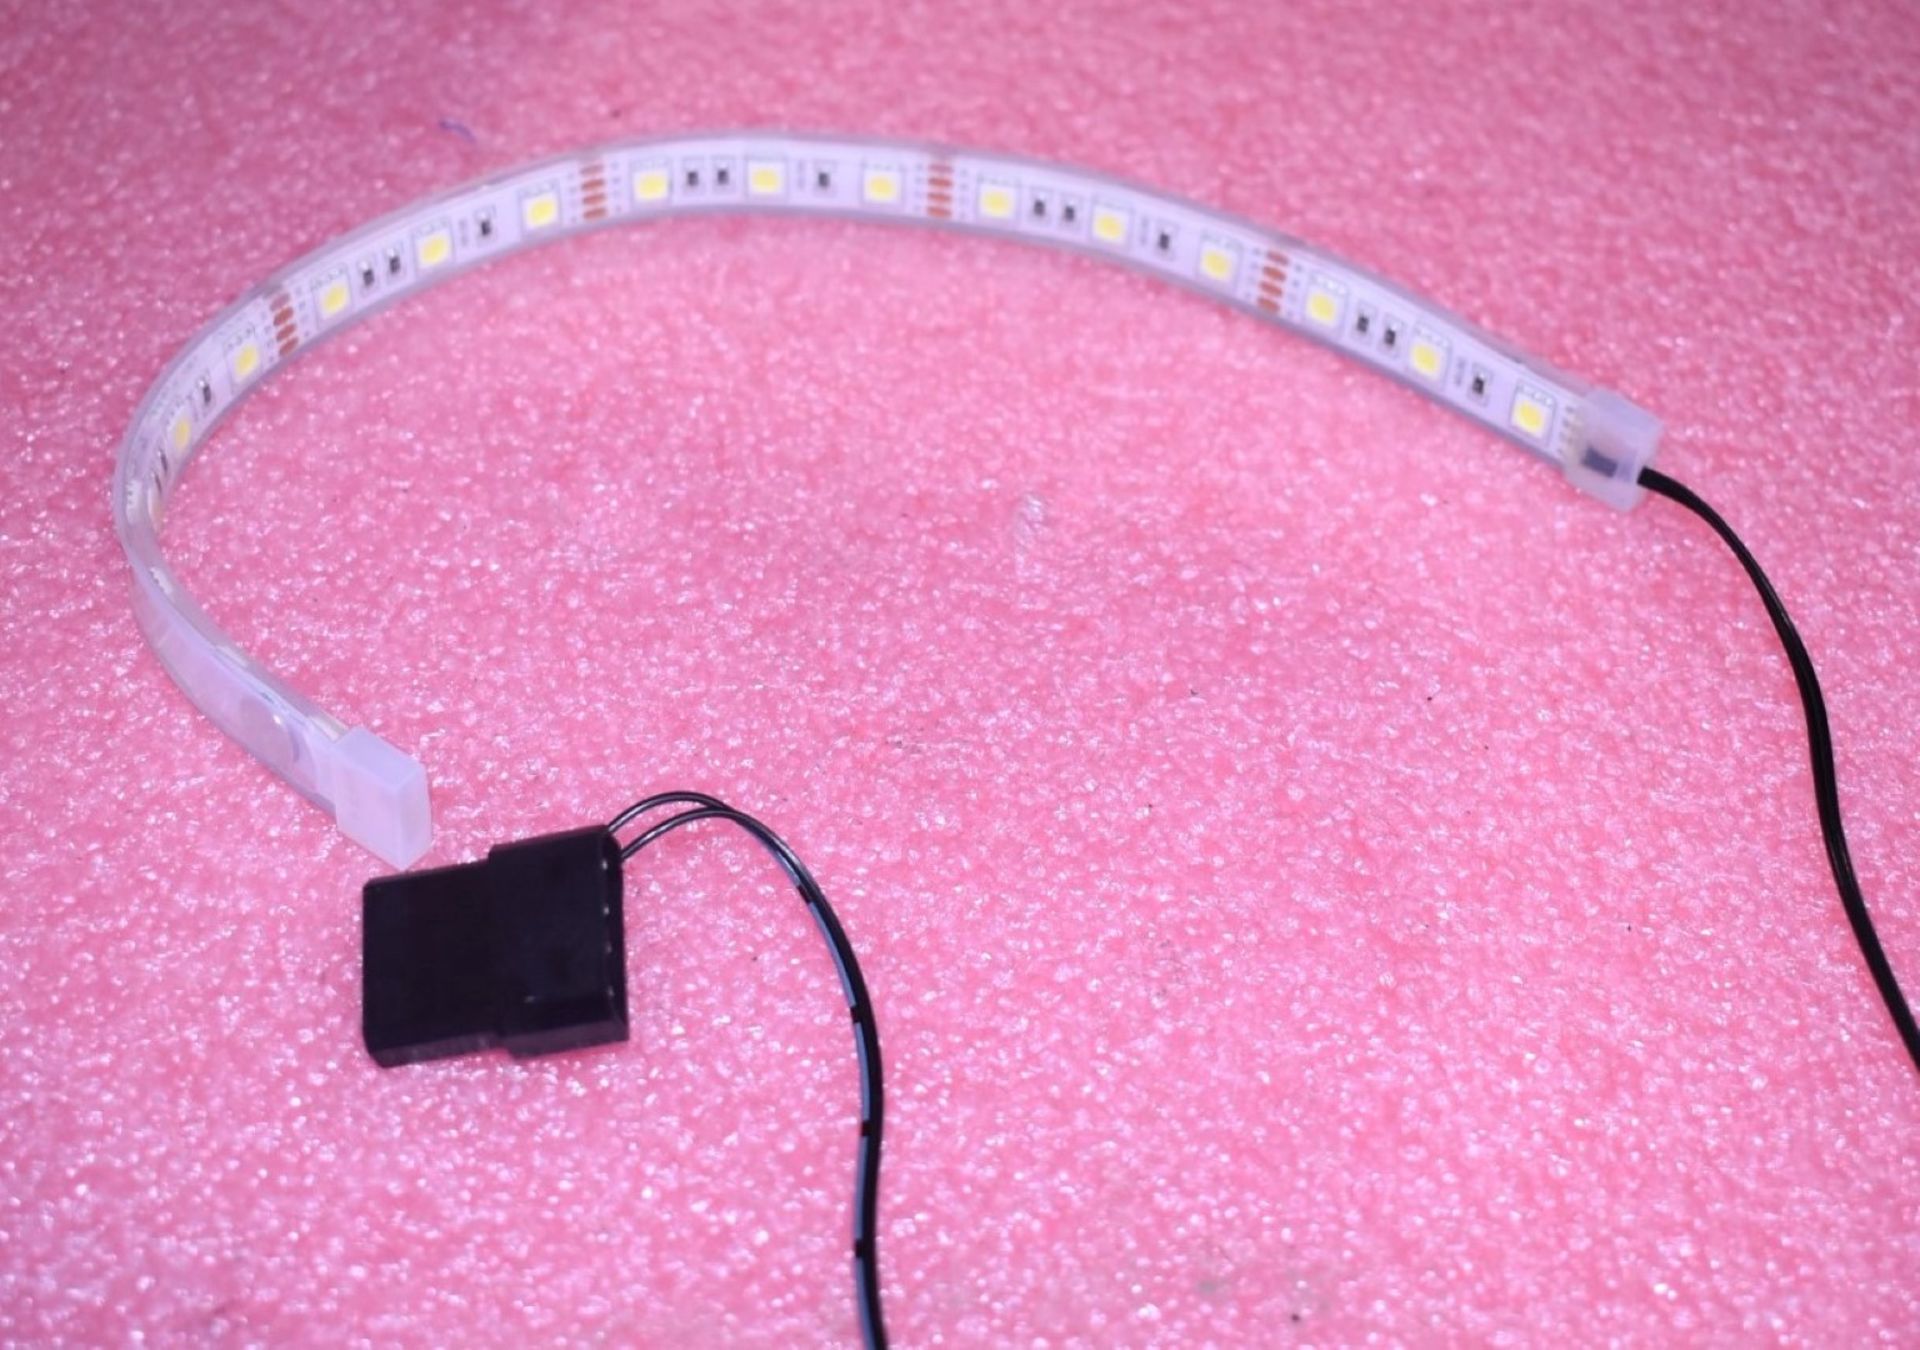 100 x PC Case Illumination 12 Inch LED Strips With Molex Connectors - New Sealed Packets - Image 2 of 5